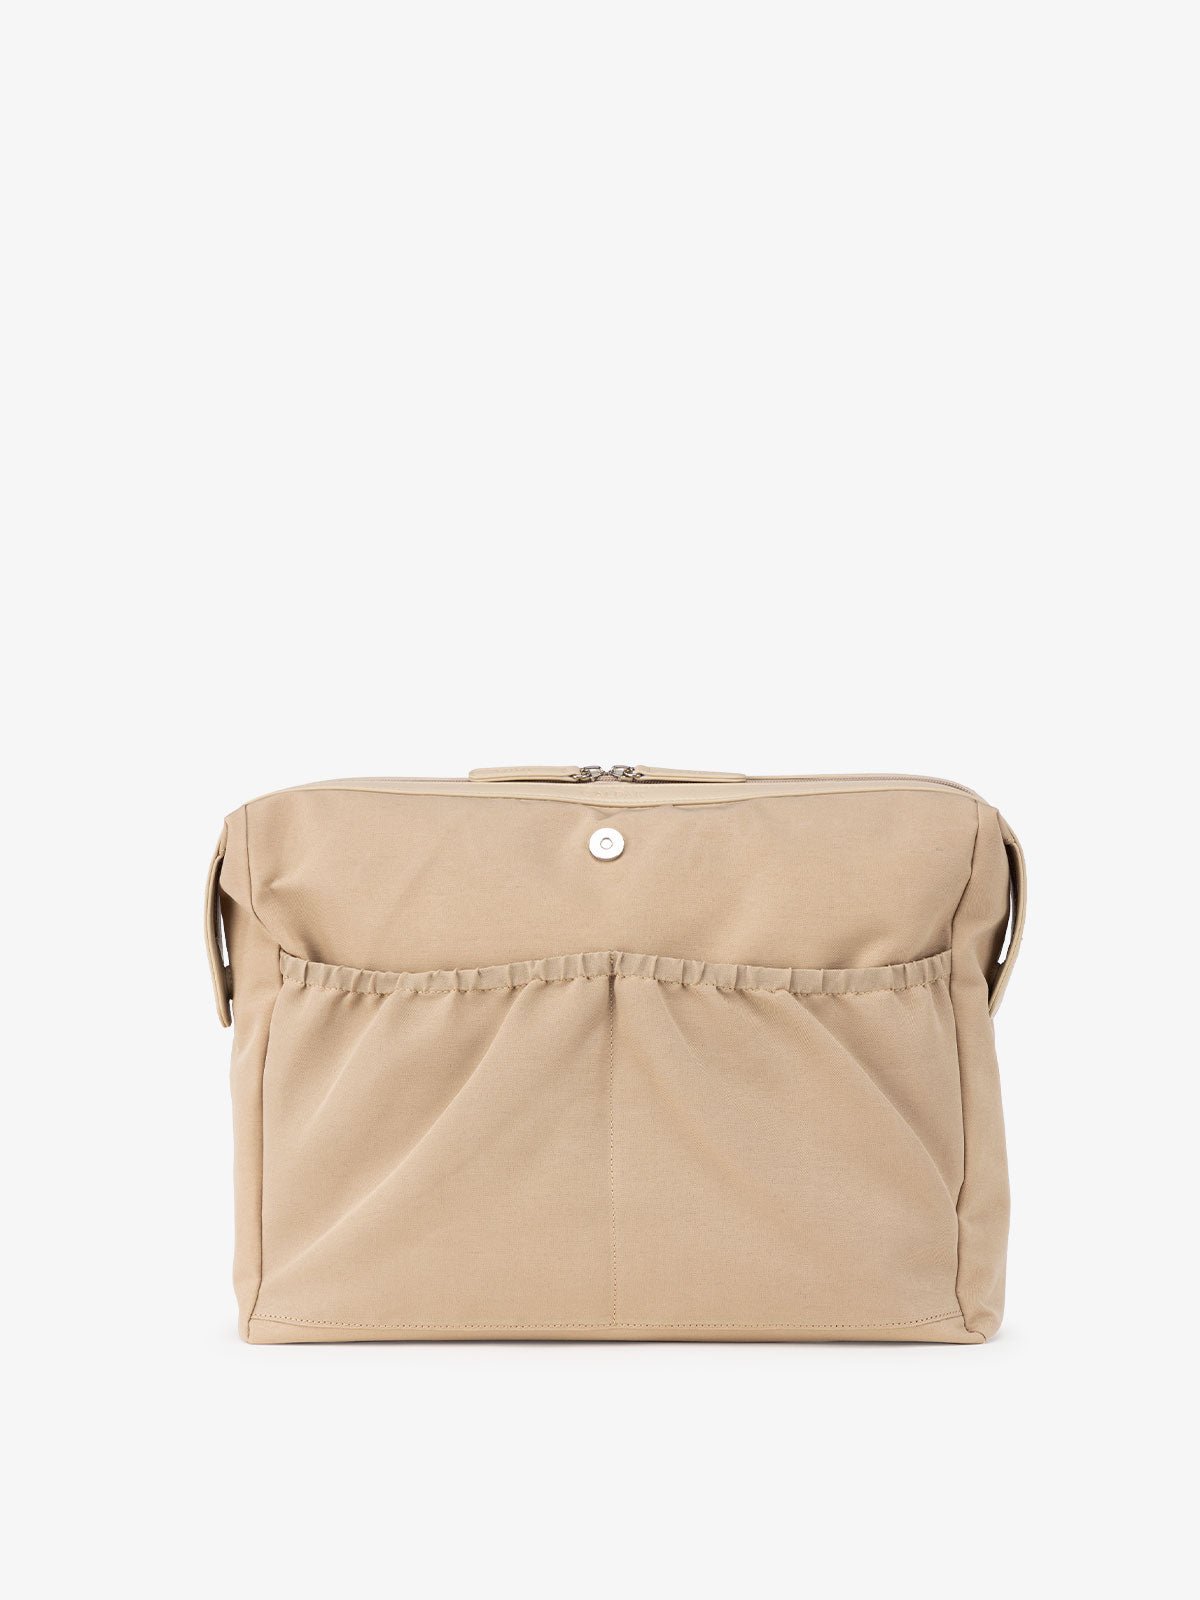 laptop sleeve with pockets